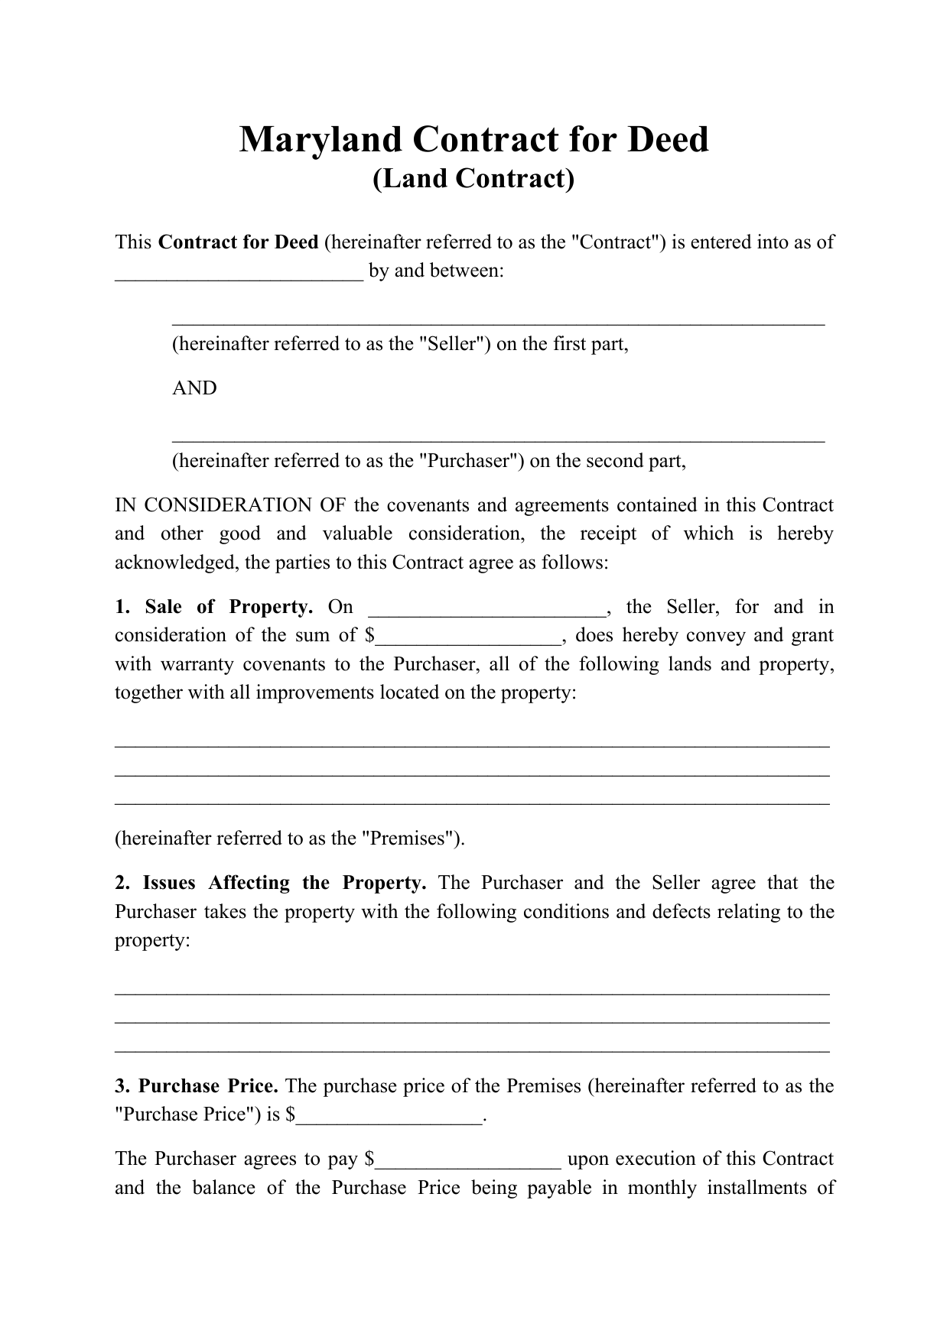 Contract for Deed (Land Contract) - Maryland, Page 1